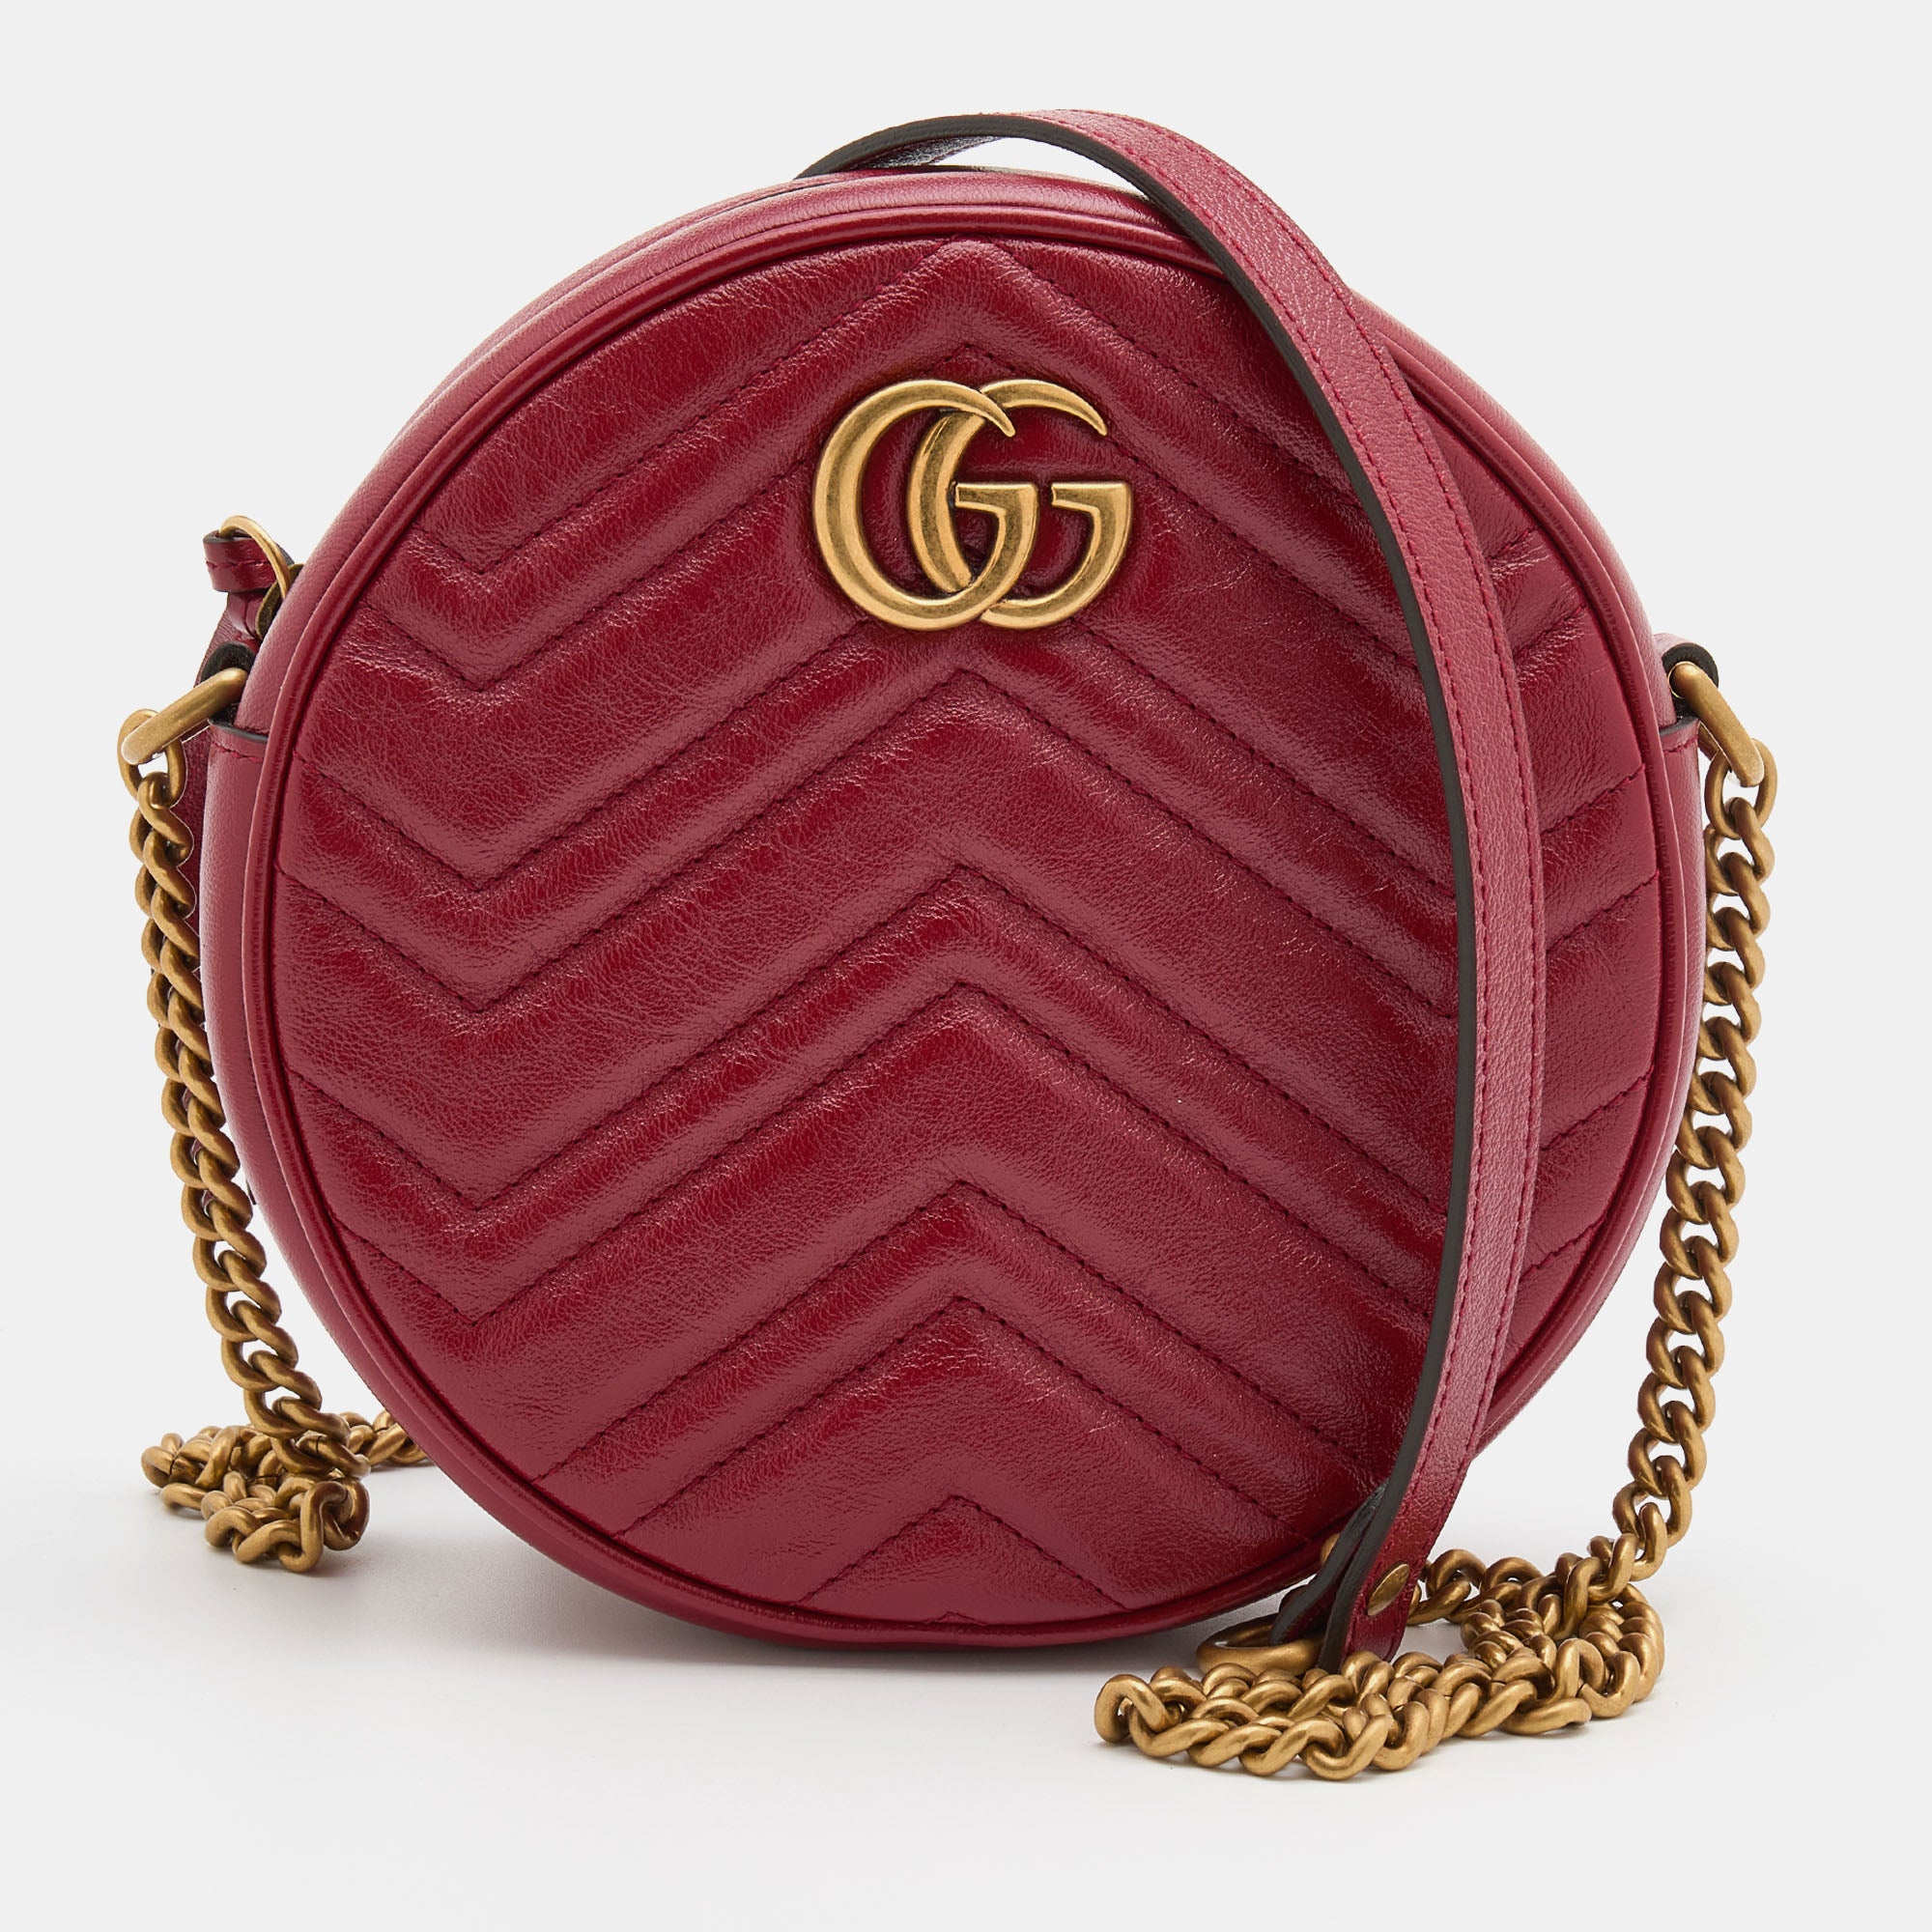 Gucci Red Matelasse Leather Mini GG Marmont Round Shoulder Bag